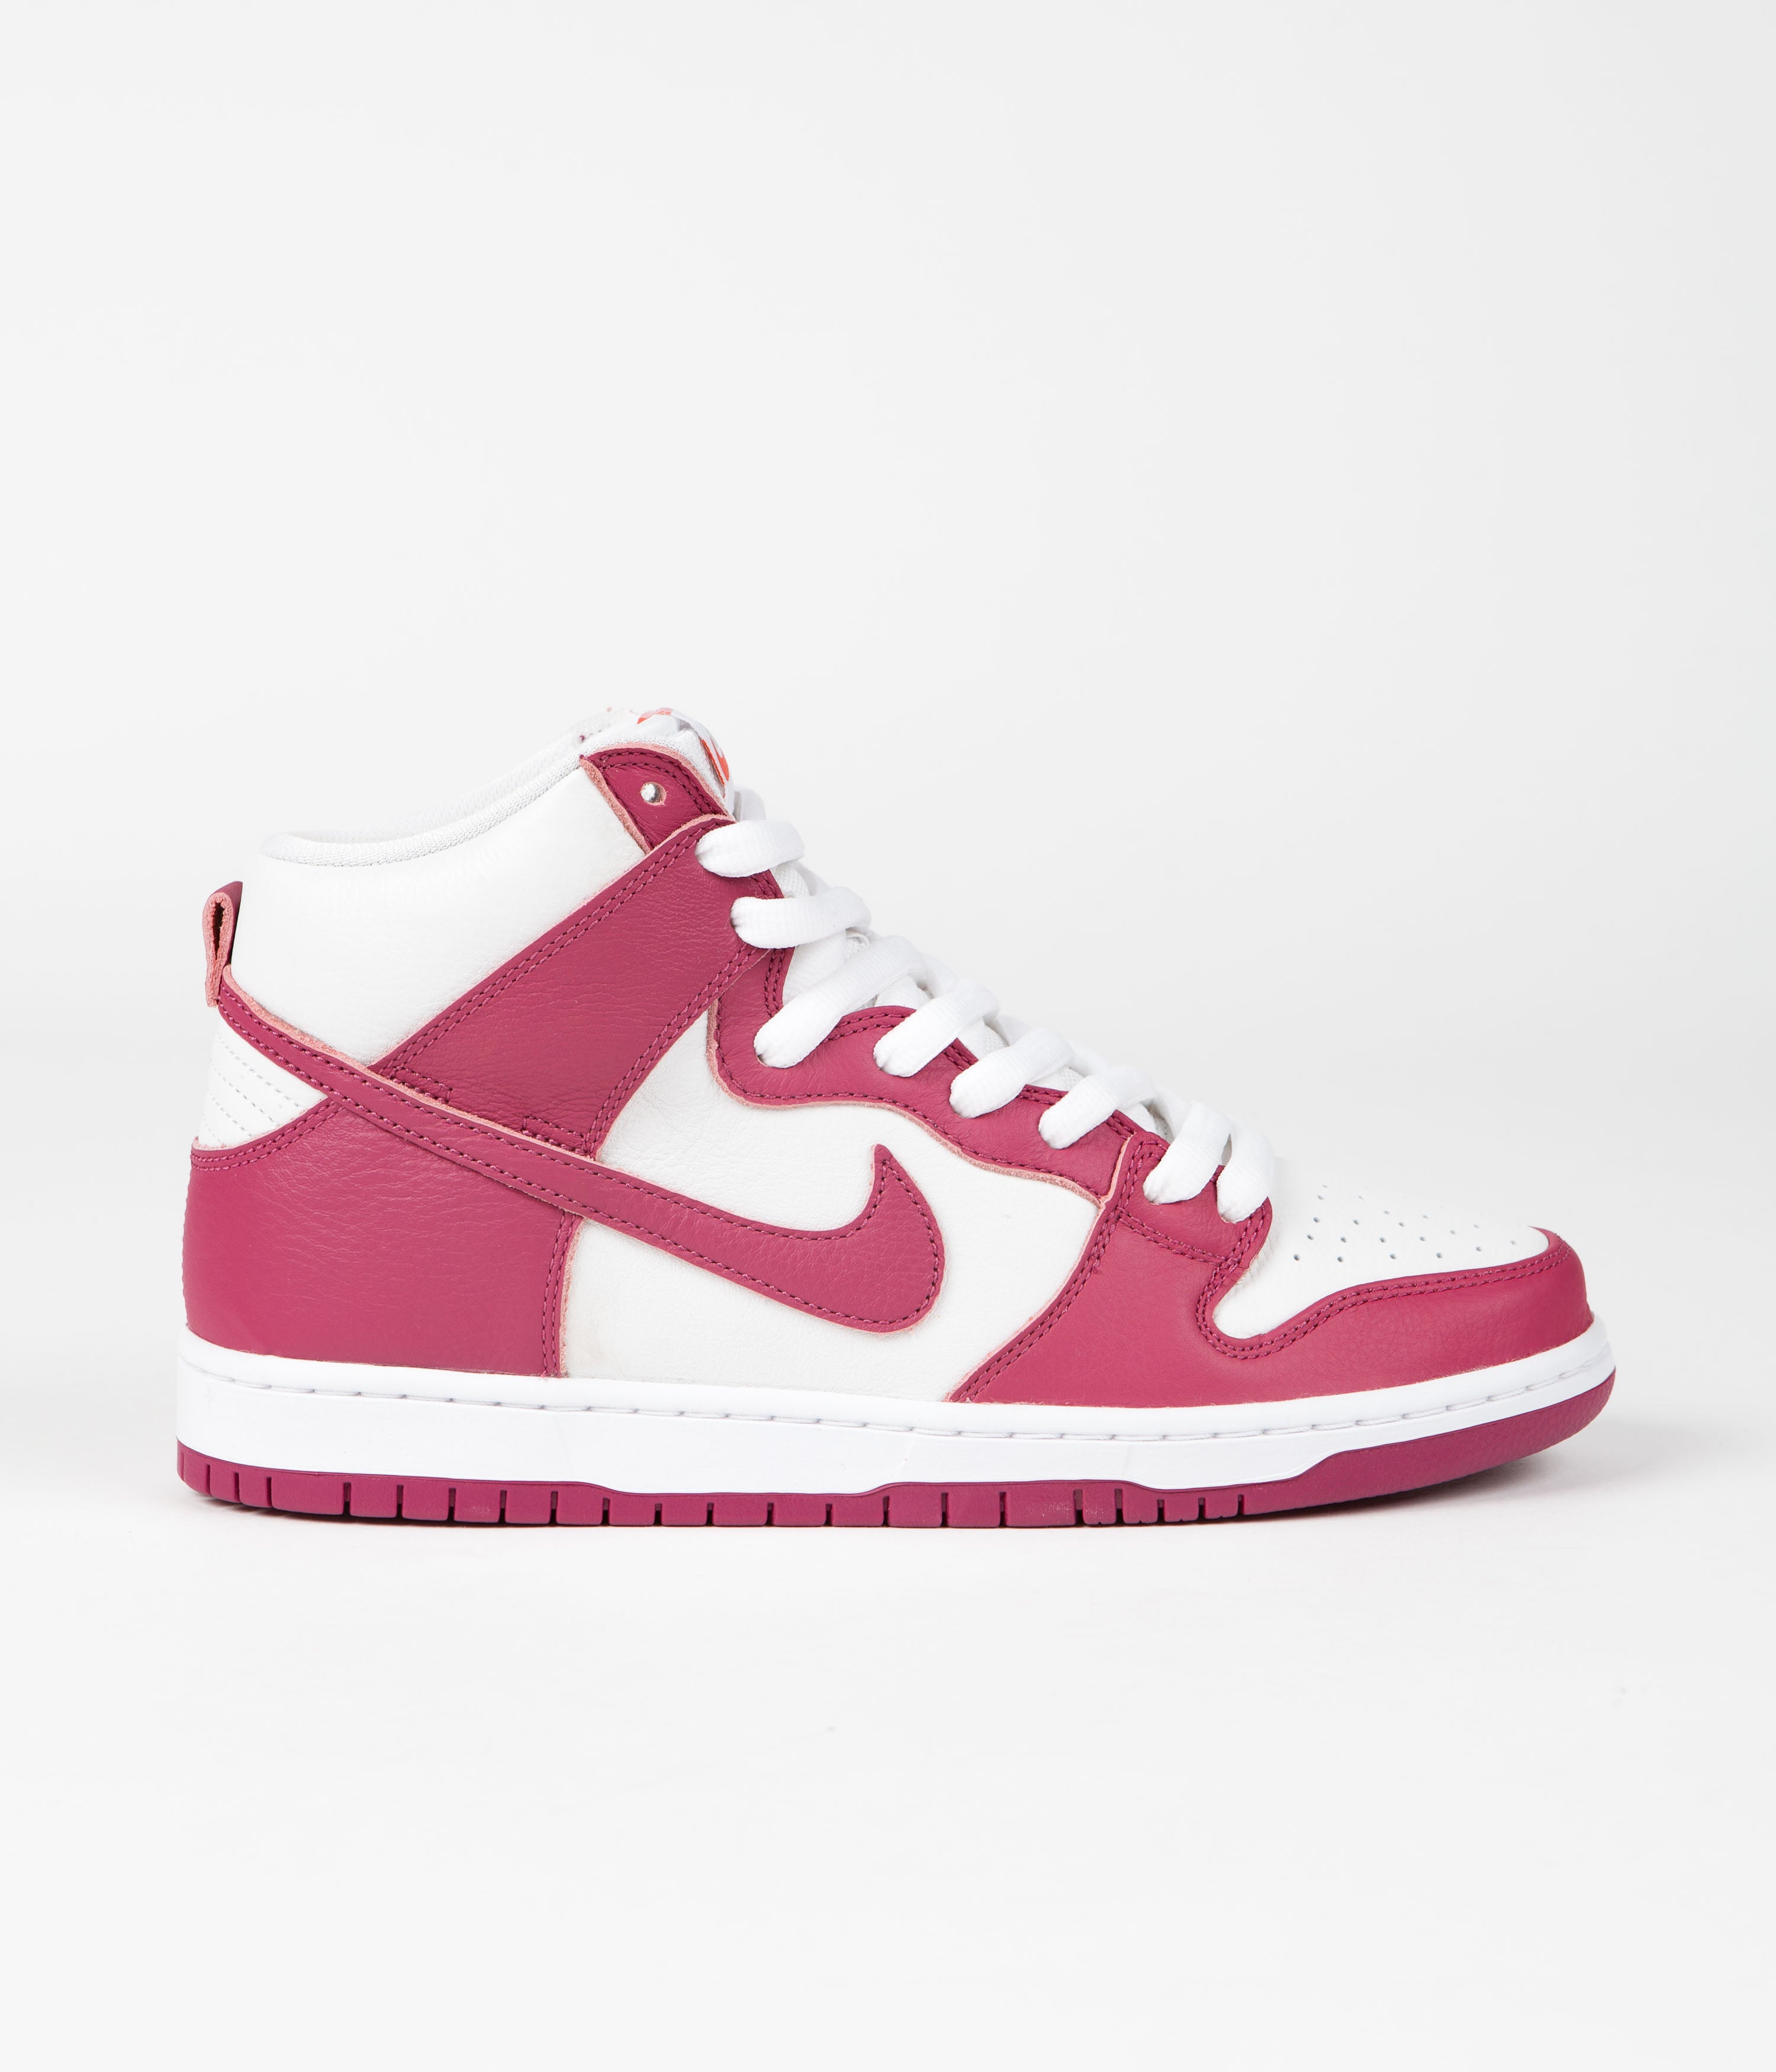 W - with nike limited edition soccer shoes for sale free - Sweet Beet / Sweet Beet | with nike sneakers for women green black Dunk High Pro Shoes - WpadcShops